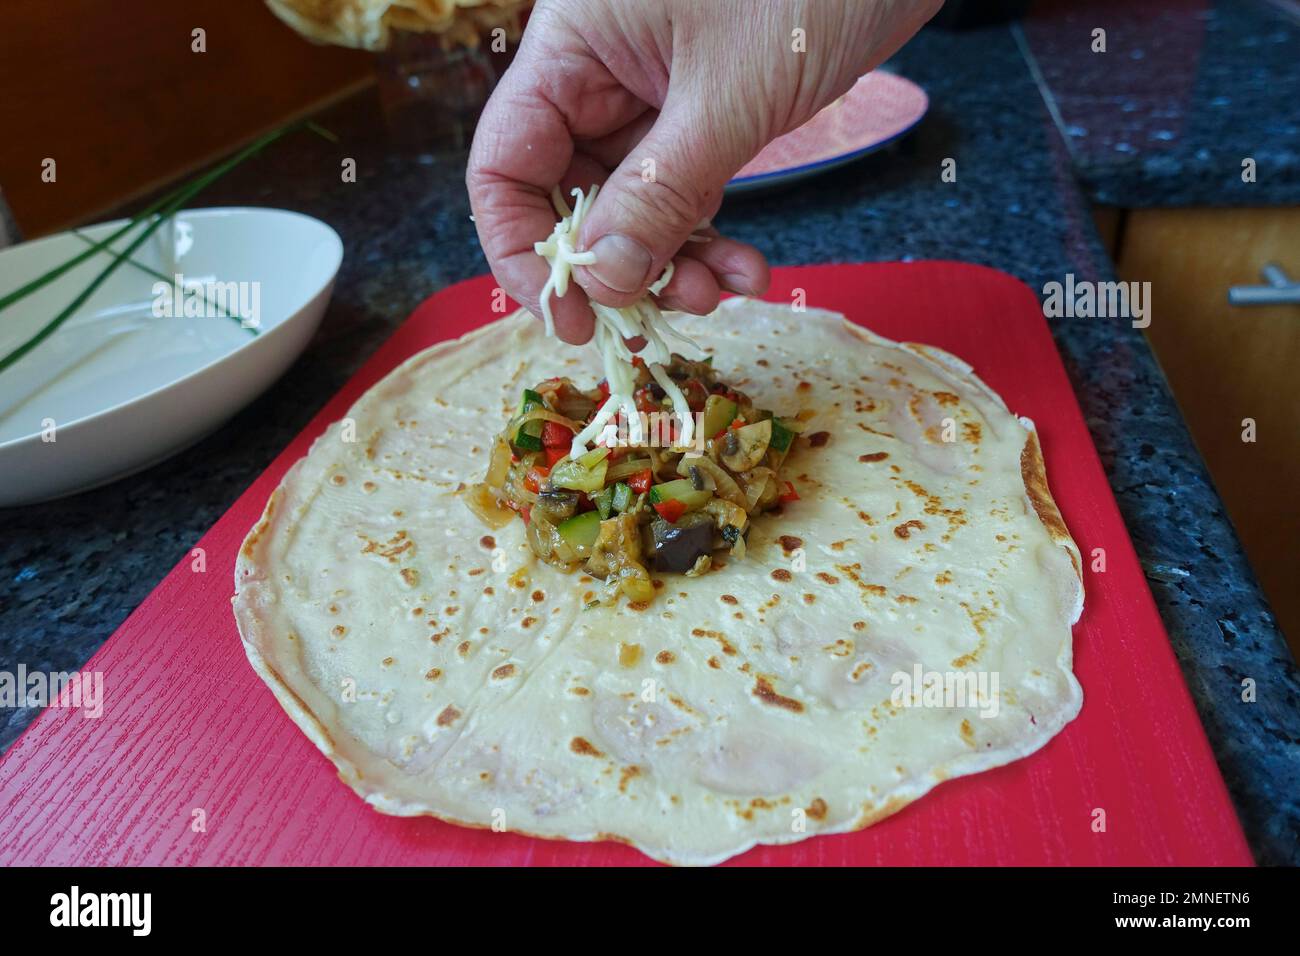 Swabian cuisine vegetarian, preparation surprise Flaedle, filled Flaedle, pancake hearty fill with vegetables and sprinkle with cheese, man hand Stock Photo